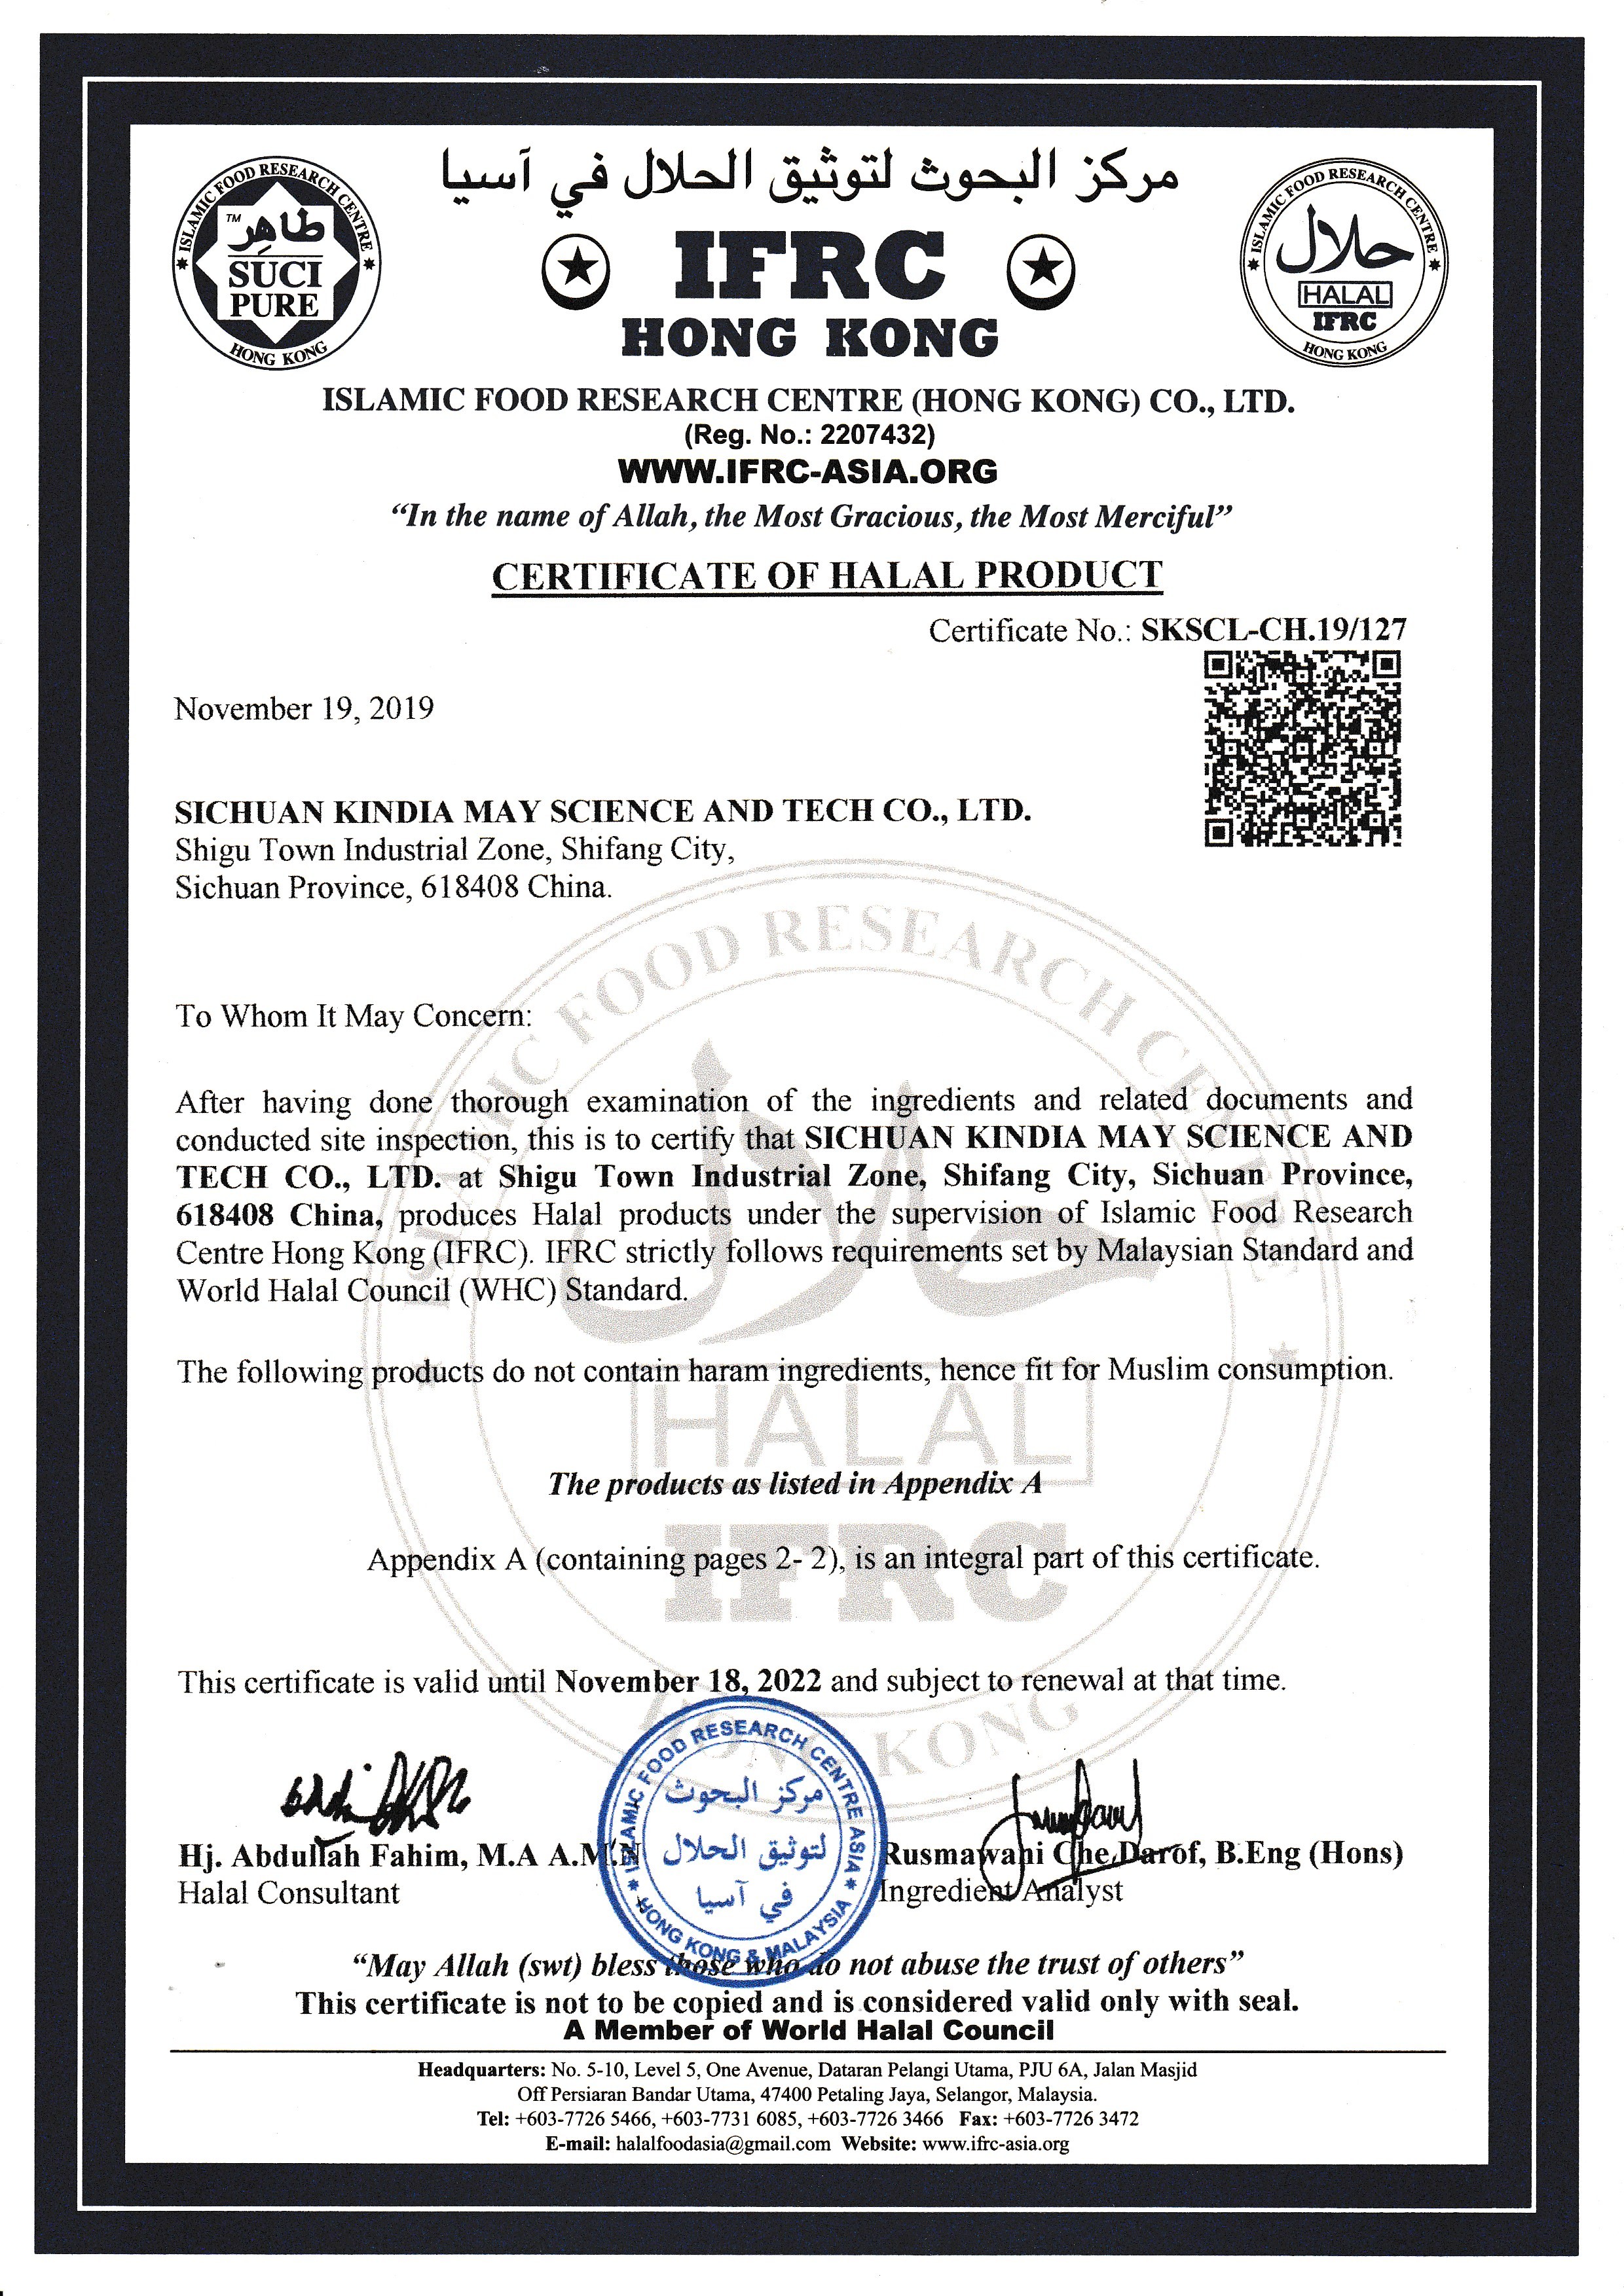 Sichuan Kindia May Science and Tech Co., Ltd Certifications